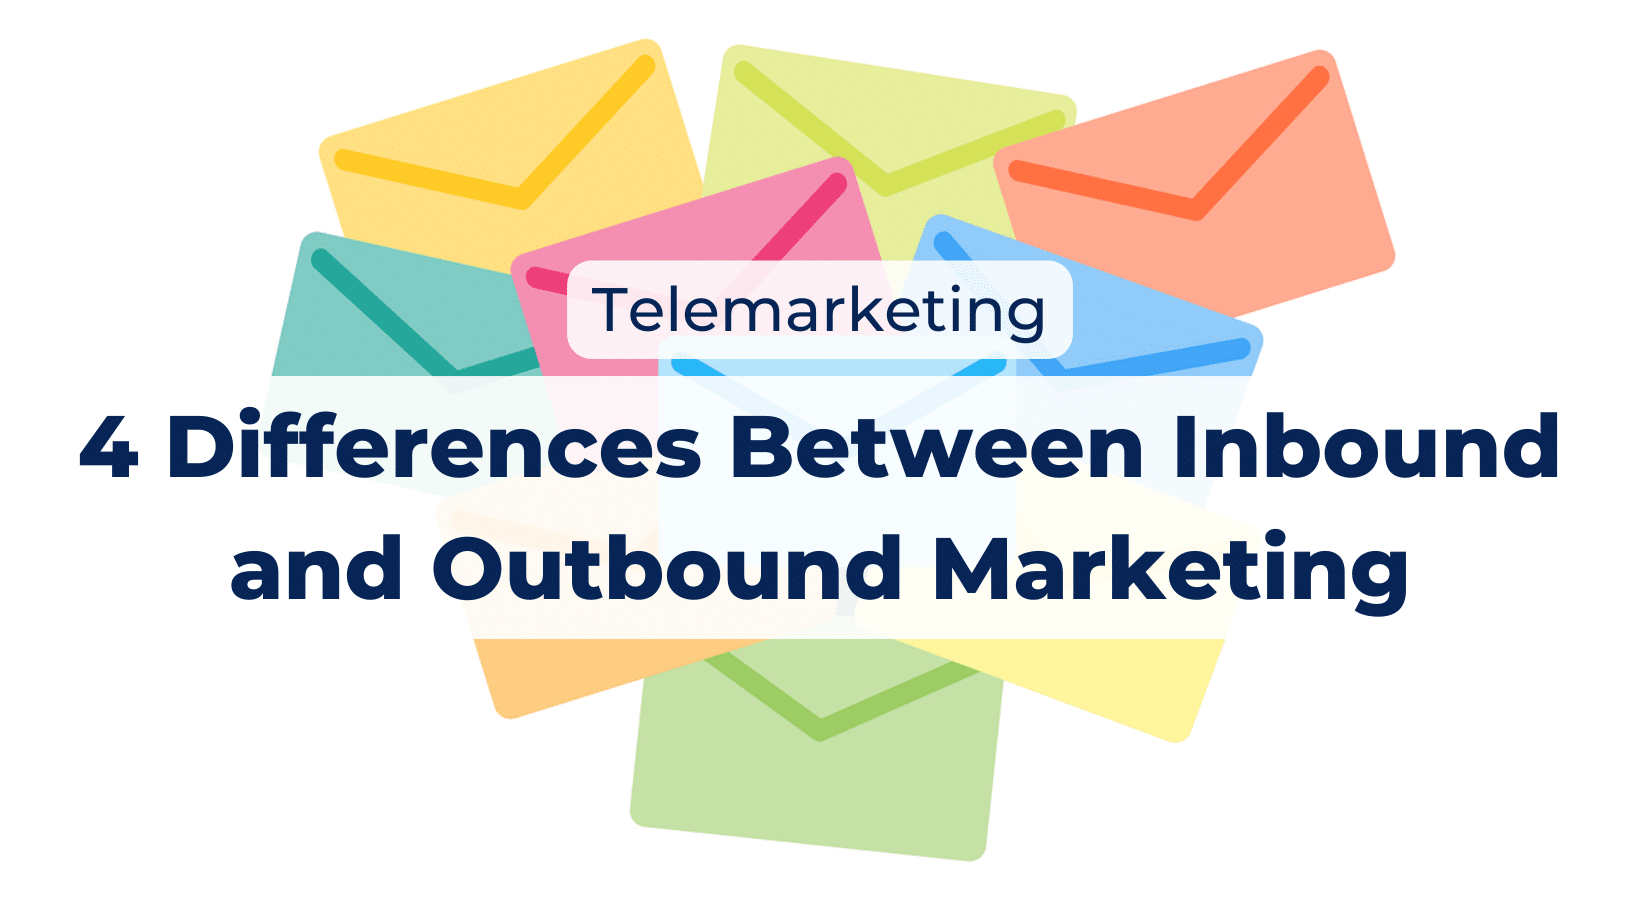 Telemarketing: 4 Differences Between Inbound and Outbound Marketing